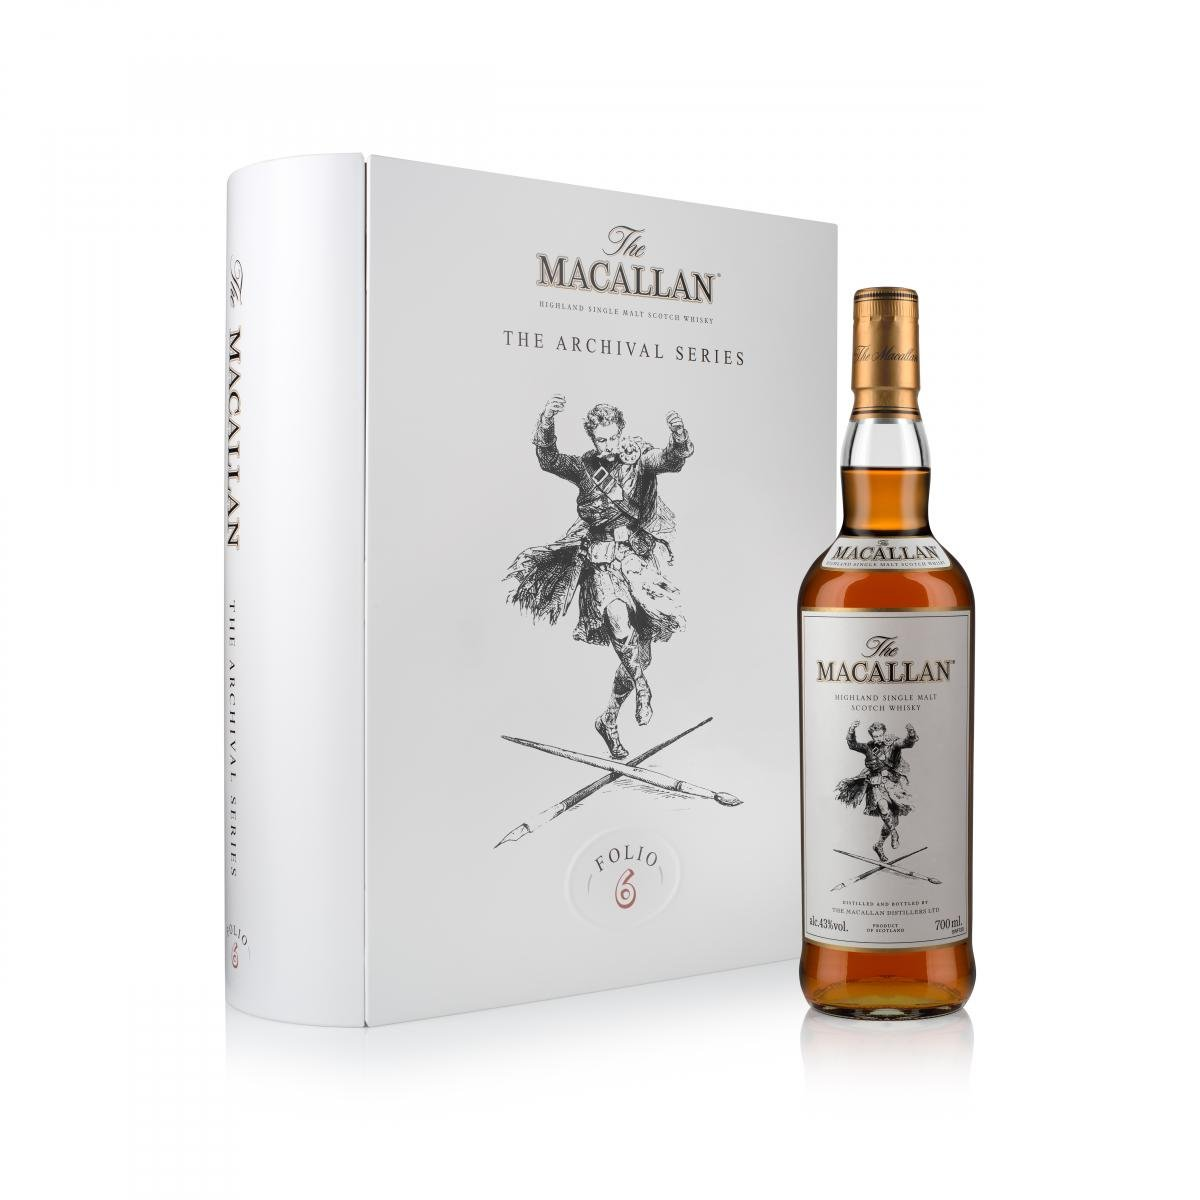 The Macallan - The Archival Series - Folio 6 70cl